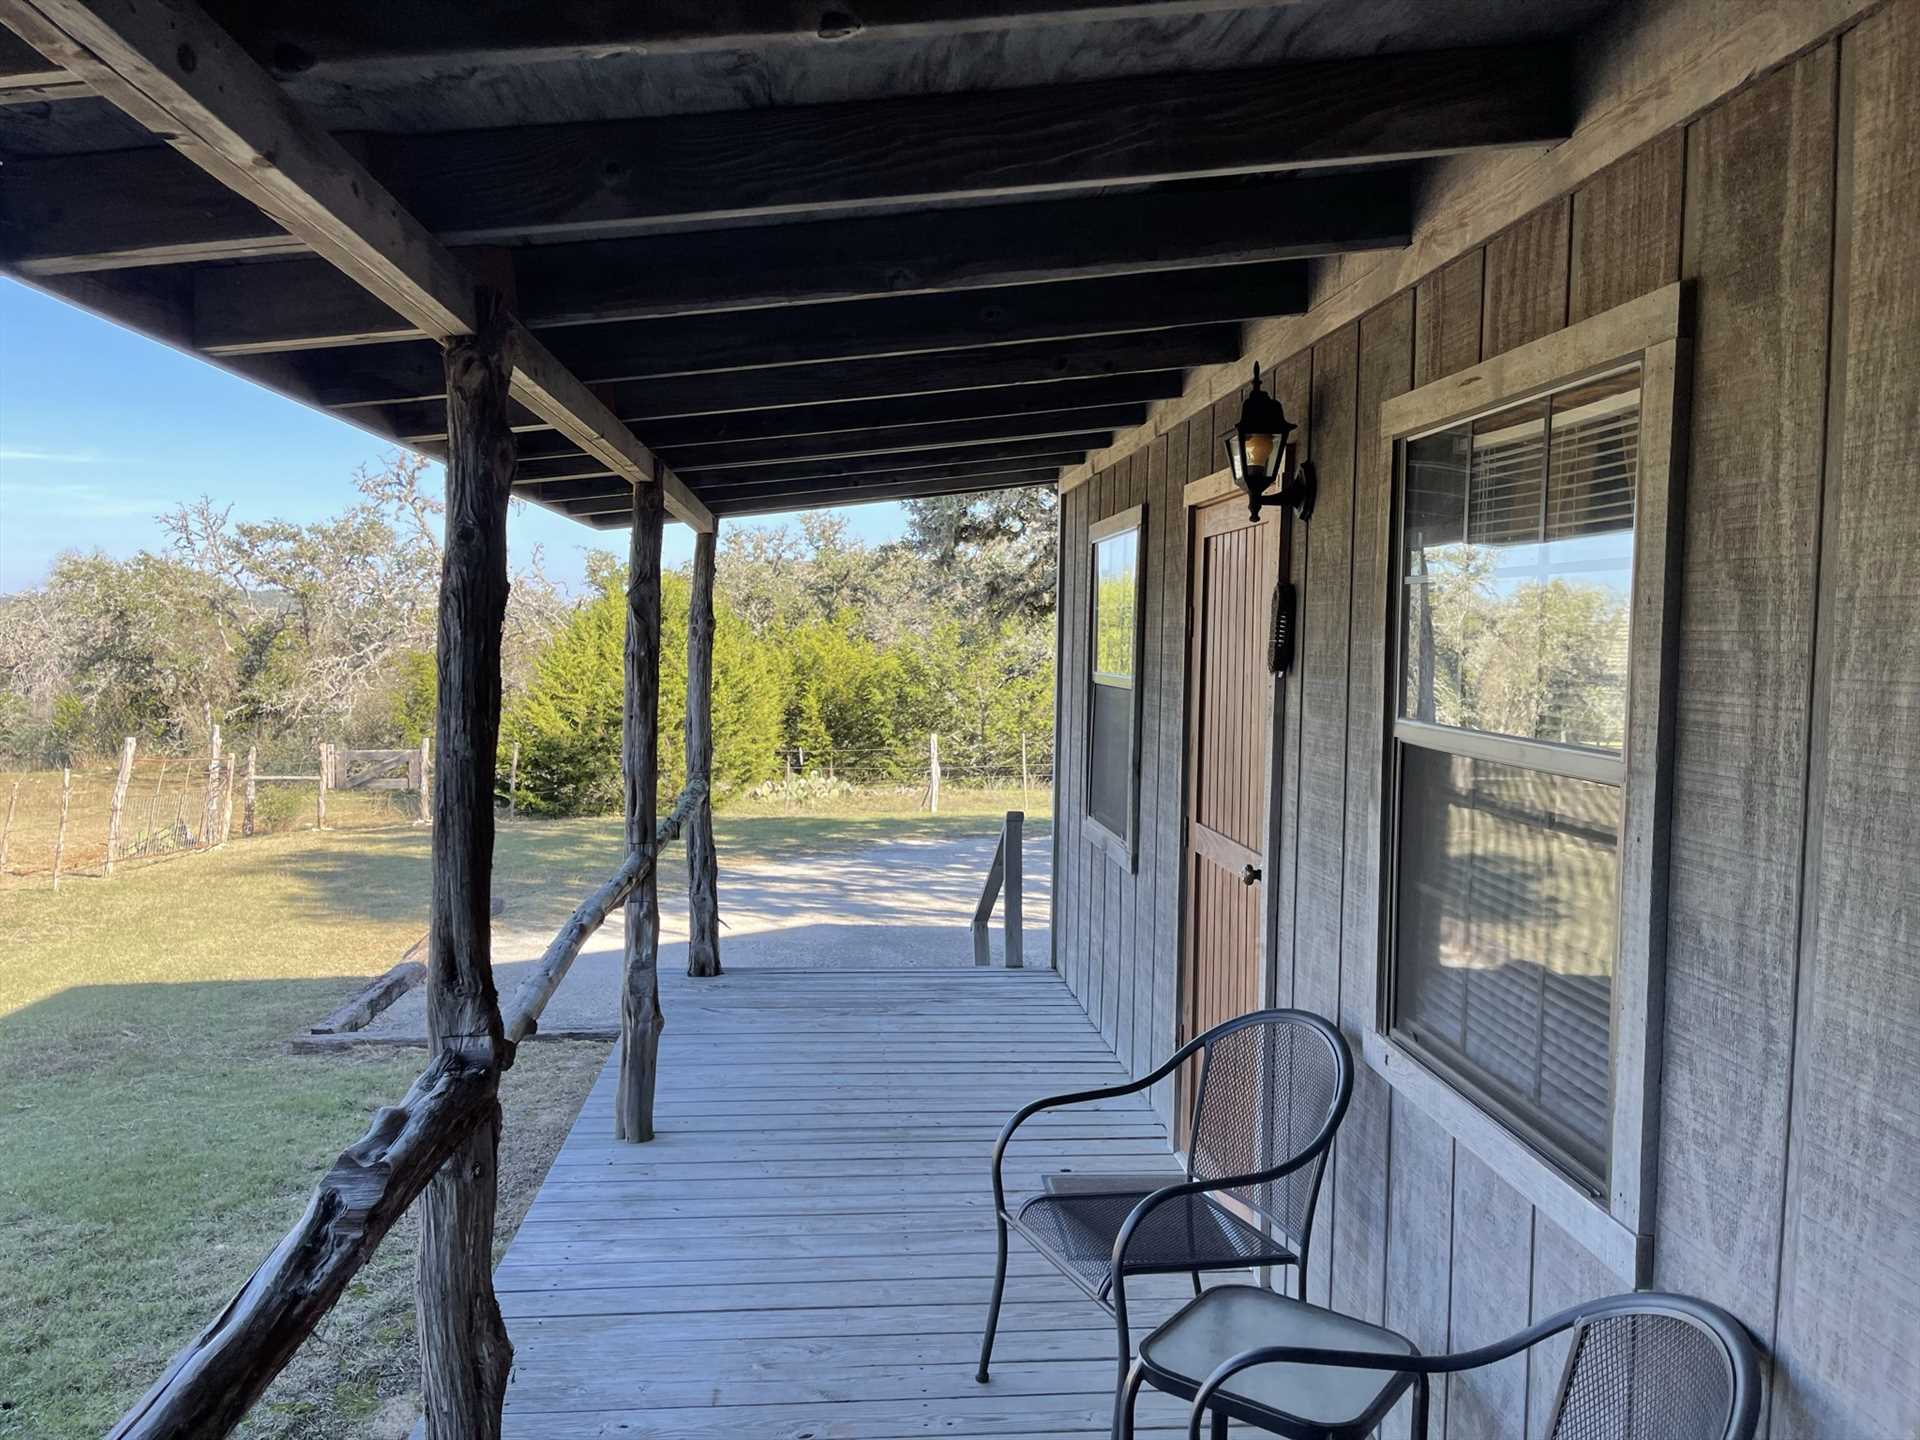                                                 The deck at Hackberry Room #9 has a rustic and natural look that is complemented perfectly by the surrounding countryside.